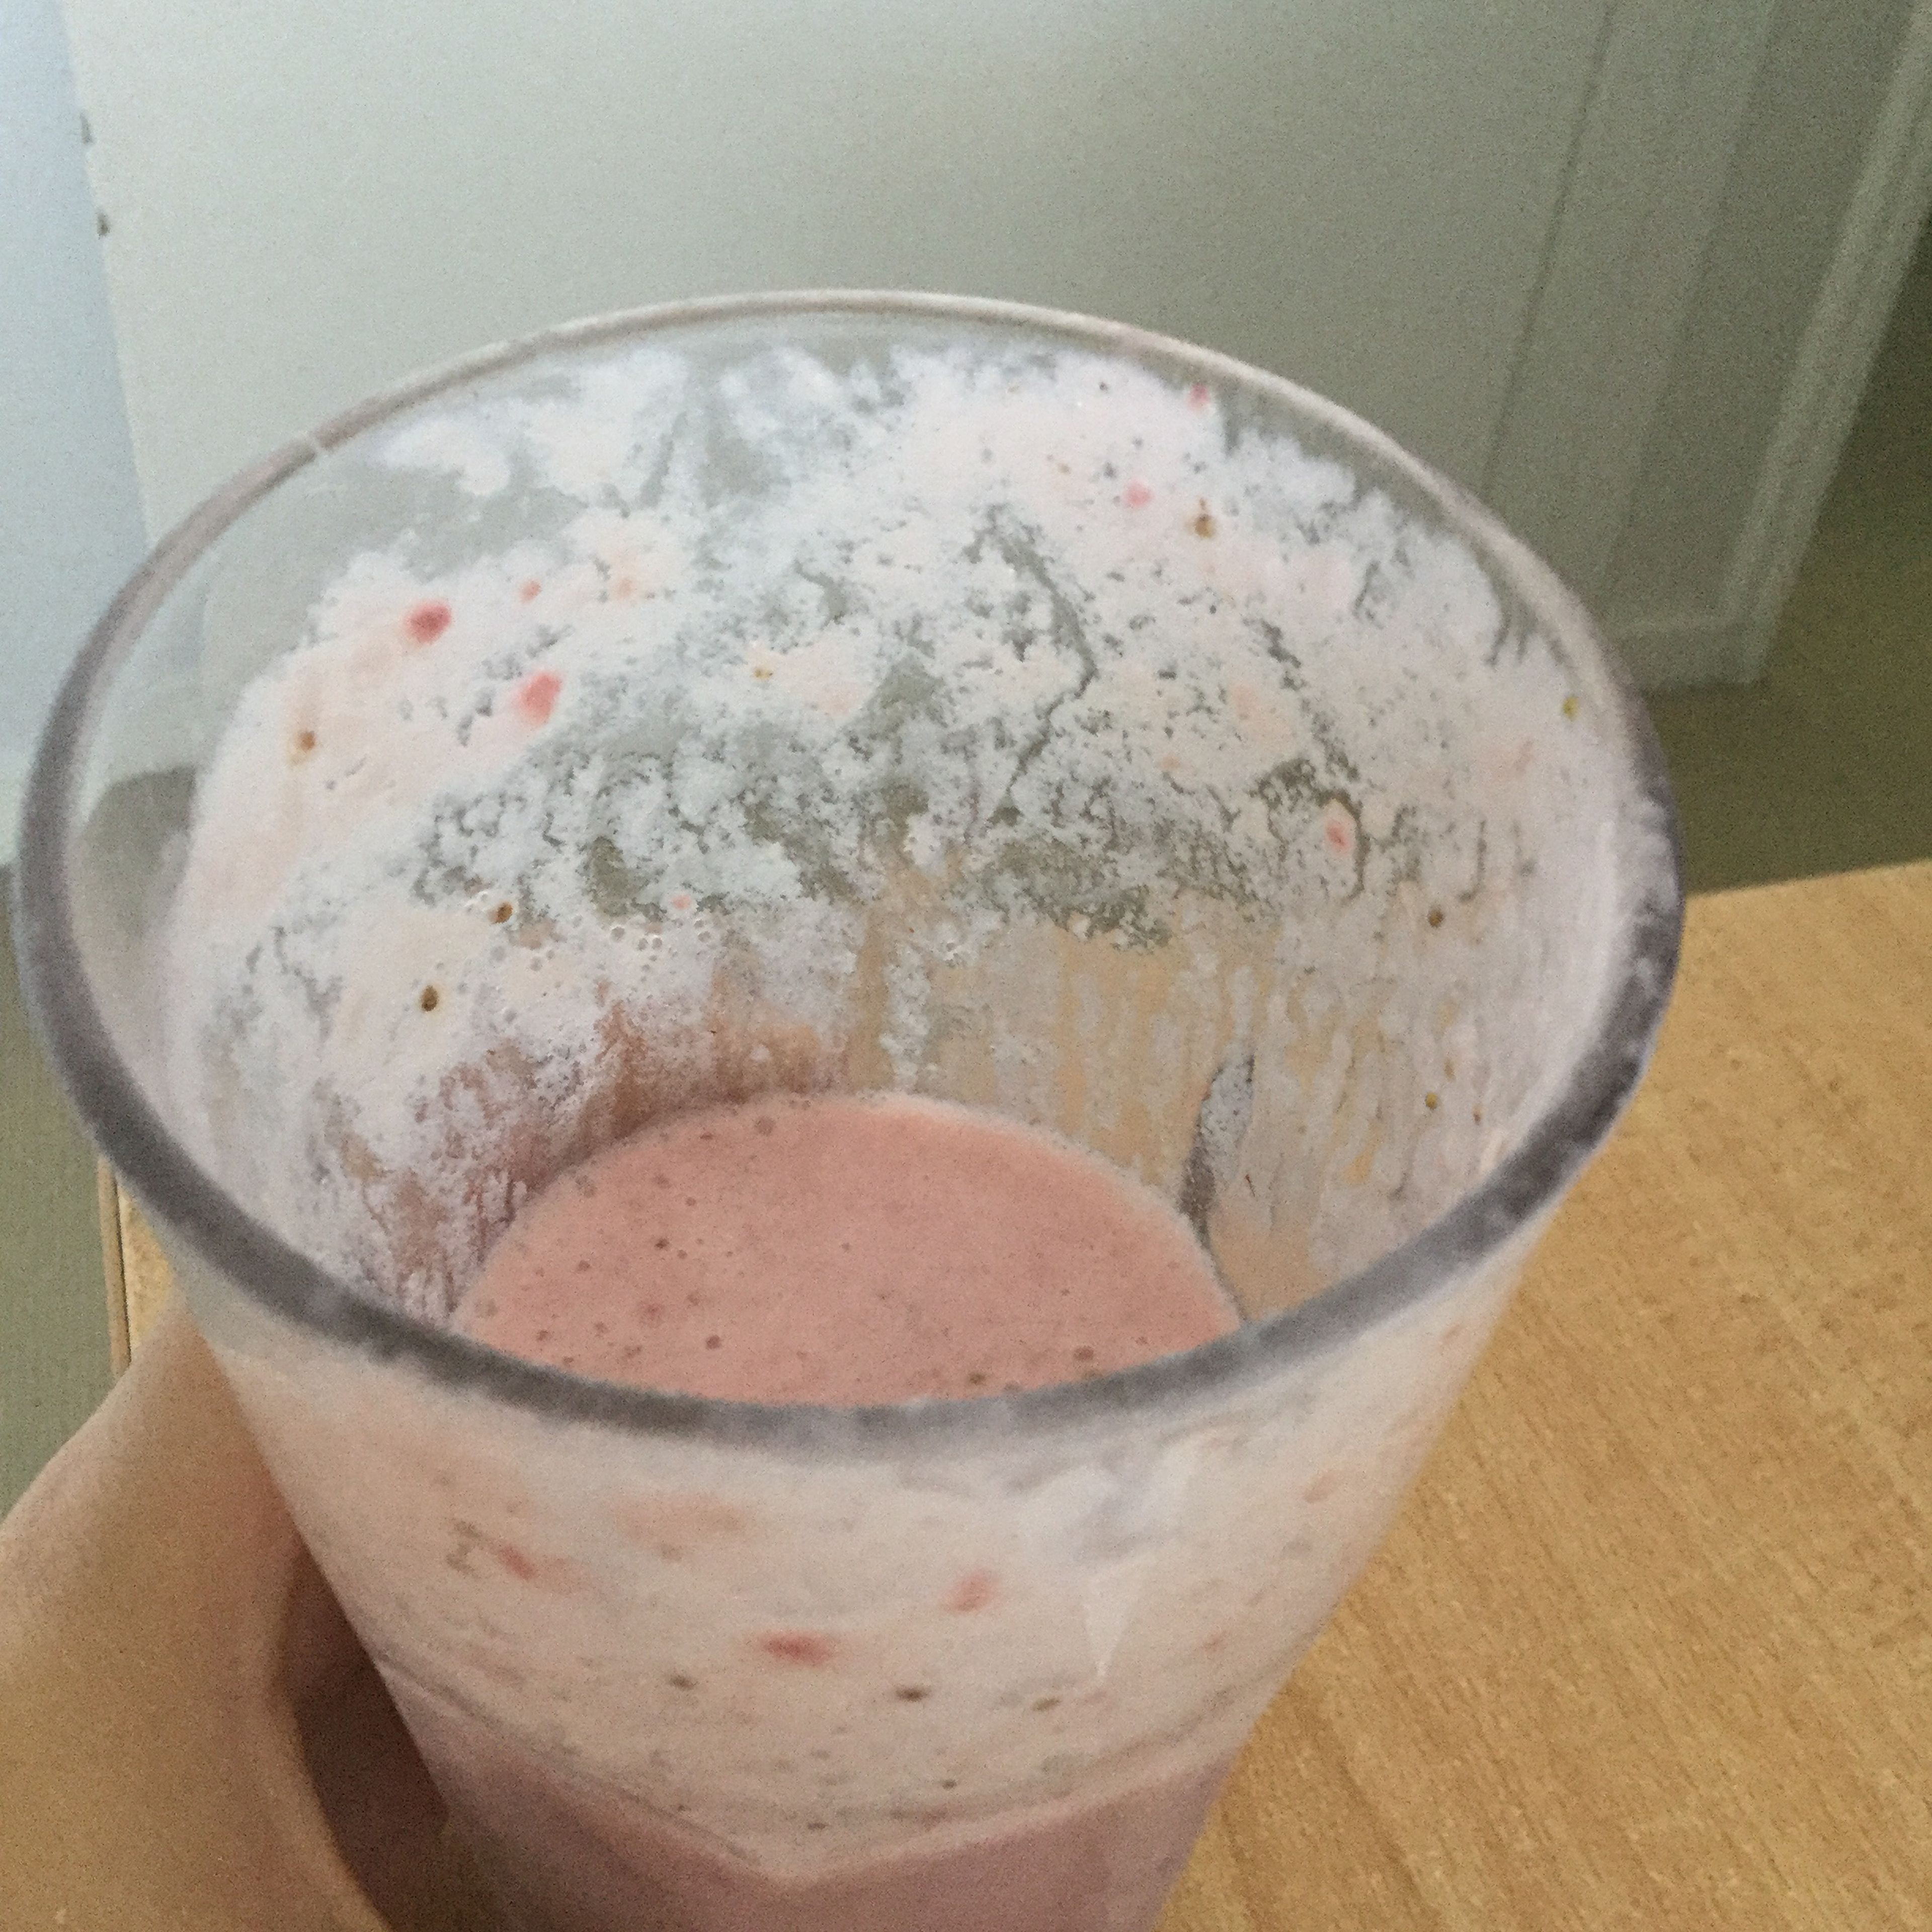 Mmmm don’t you jut love a good strawberry smoothie! Put your strawberry’s in your blender along with your milk, sugar and vanilla extract. Blend until your liking. Poor into cup and add a bit of ice if you’d like!